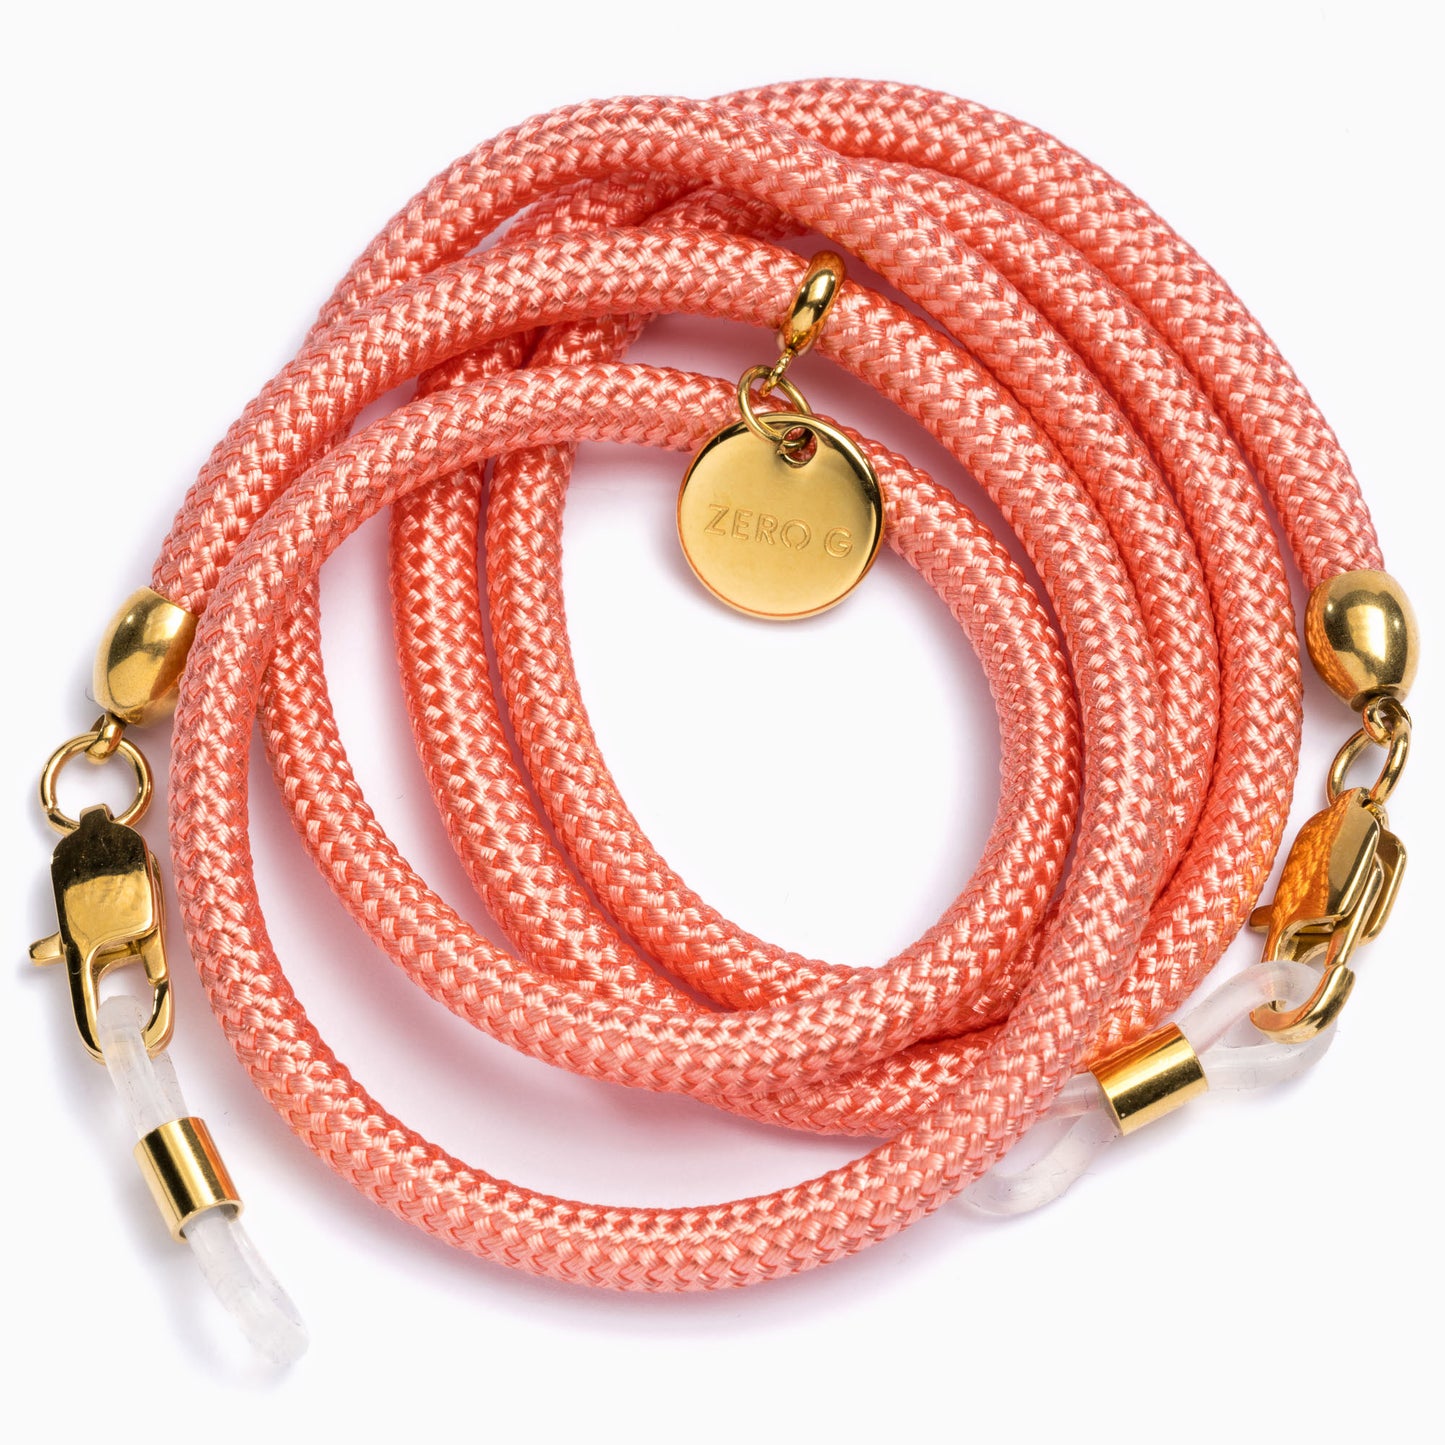 "Glossy Coral" Brillenband (koralle)